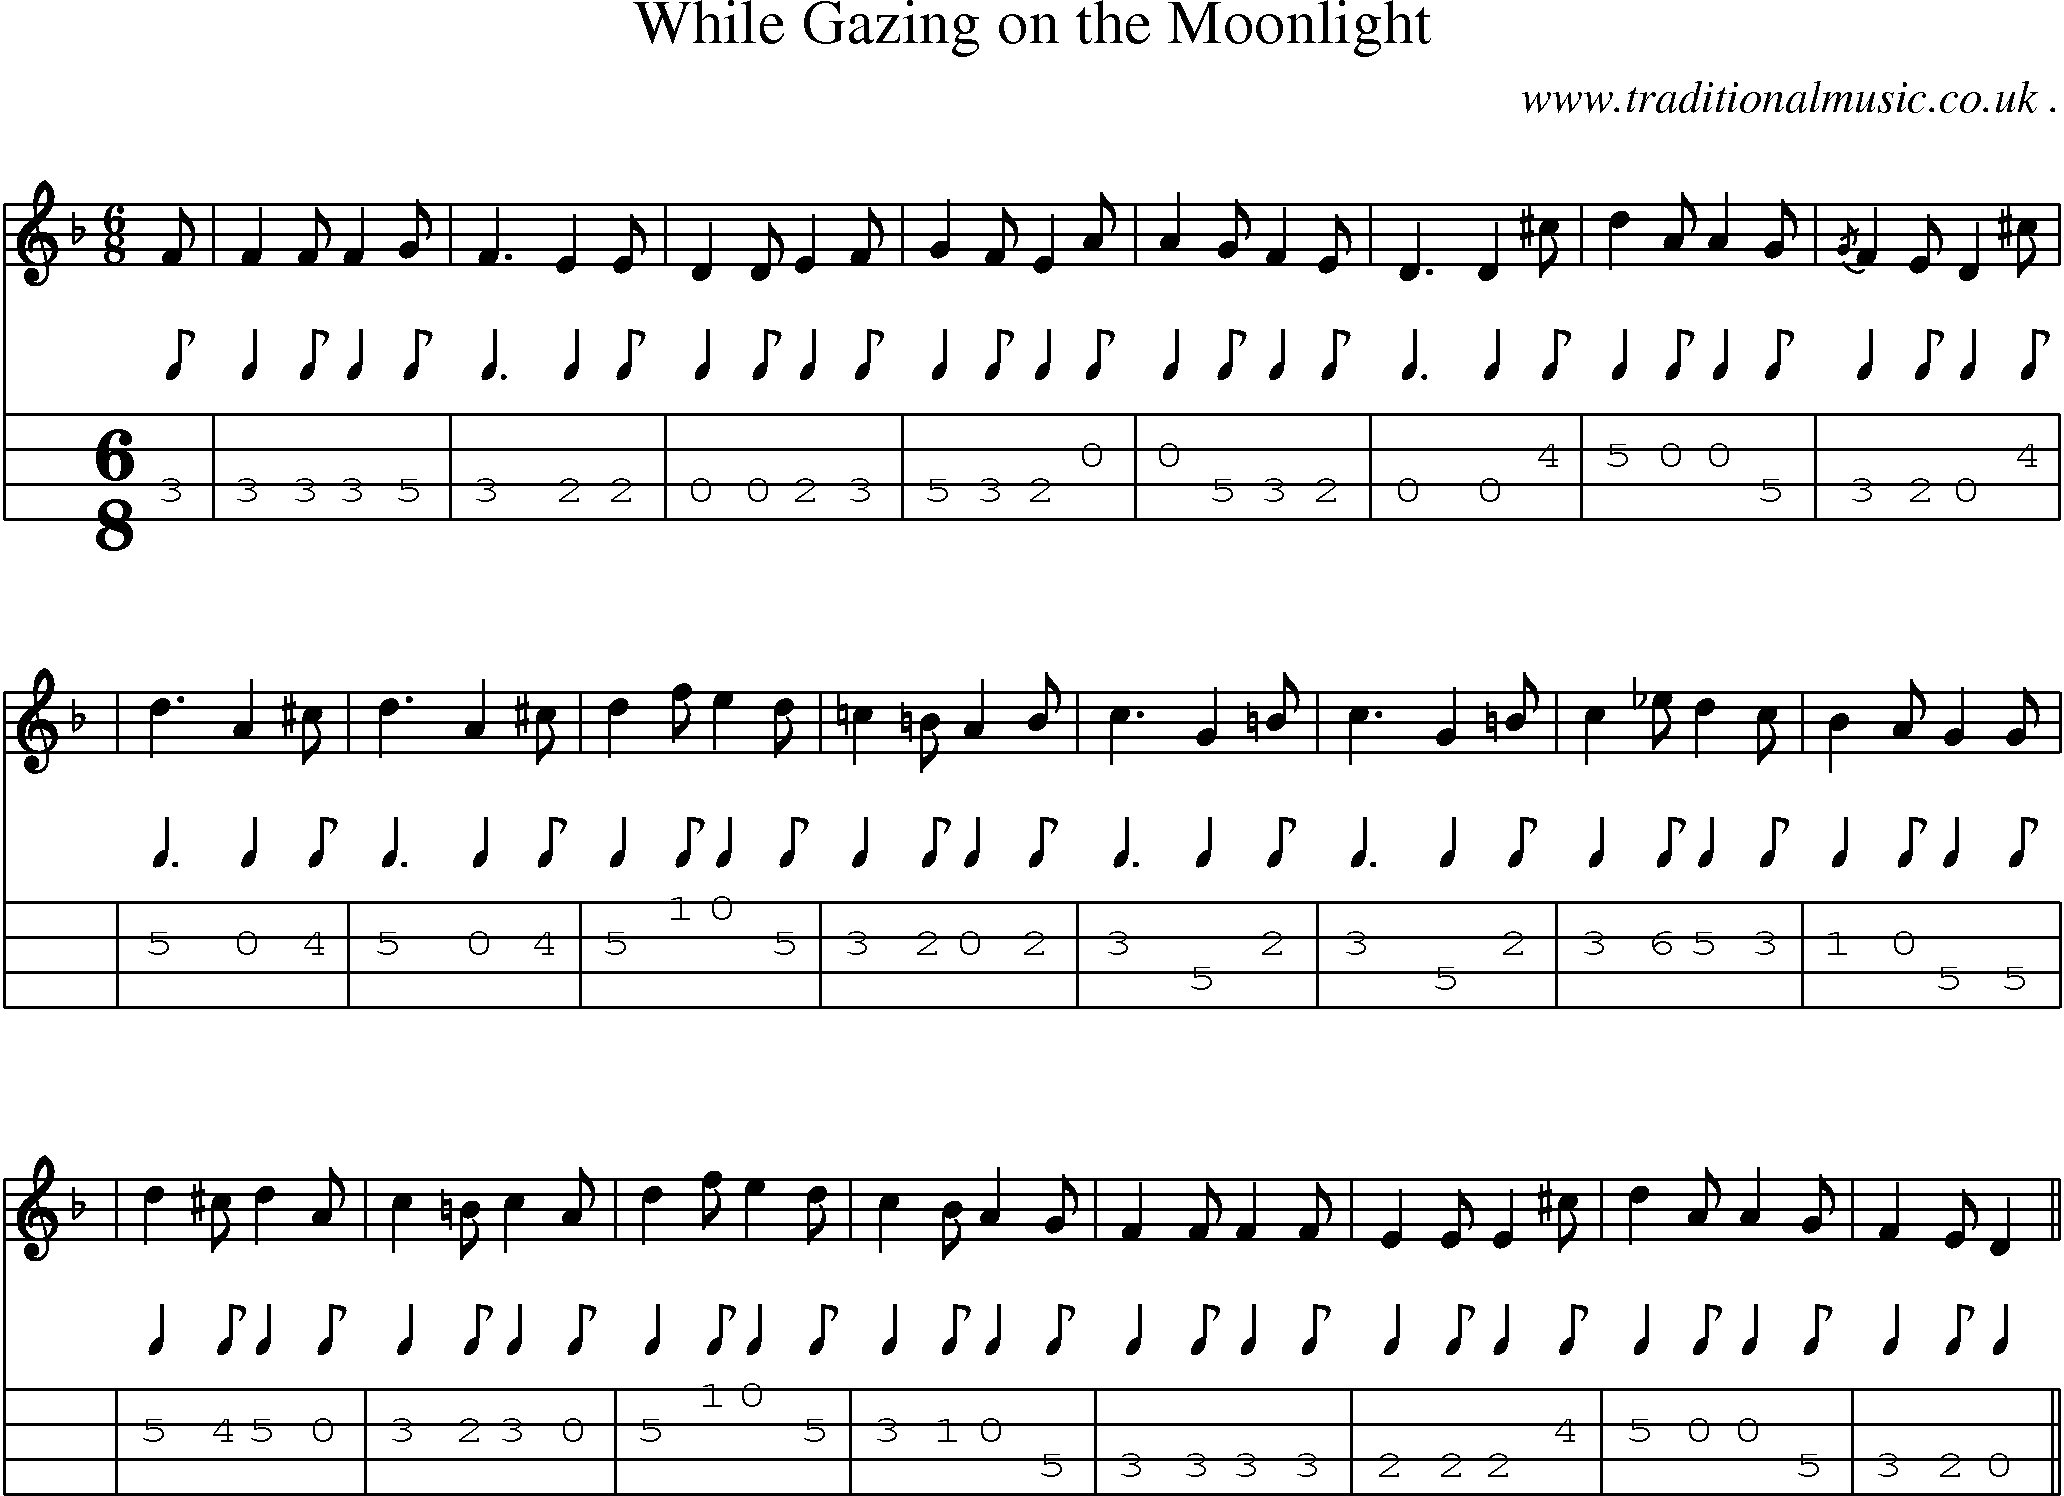 Sheet-music  score, Chords and Mandolin Tabs for While Gazing On The Moonlight